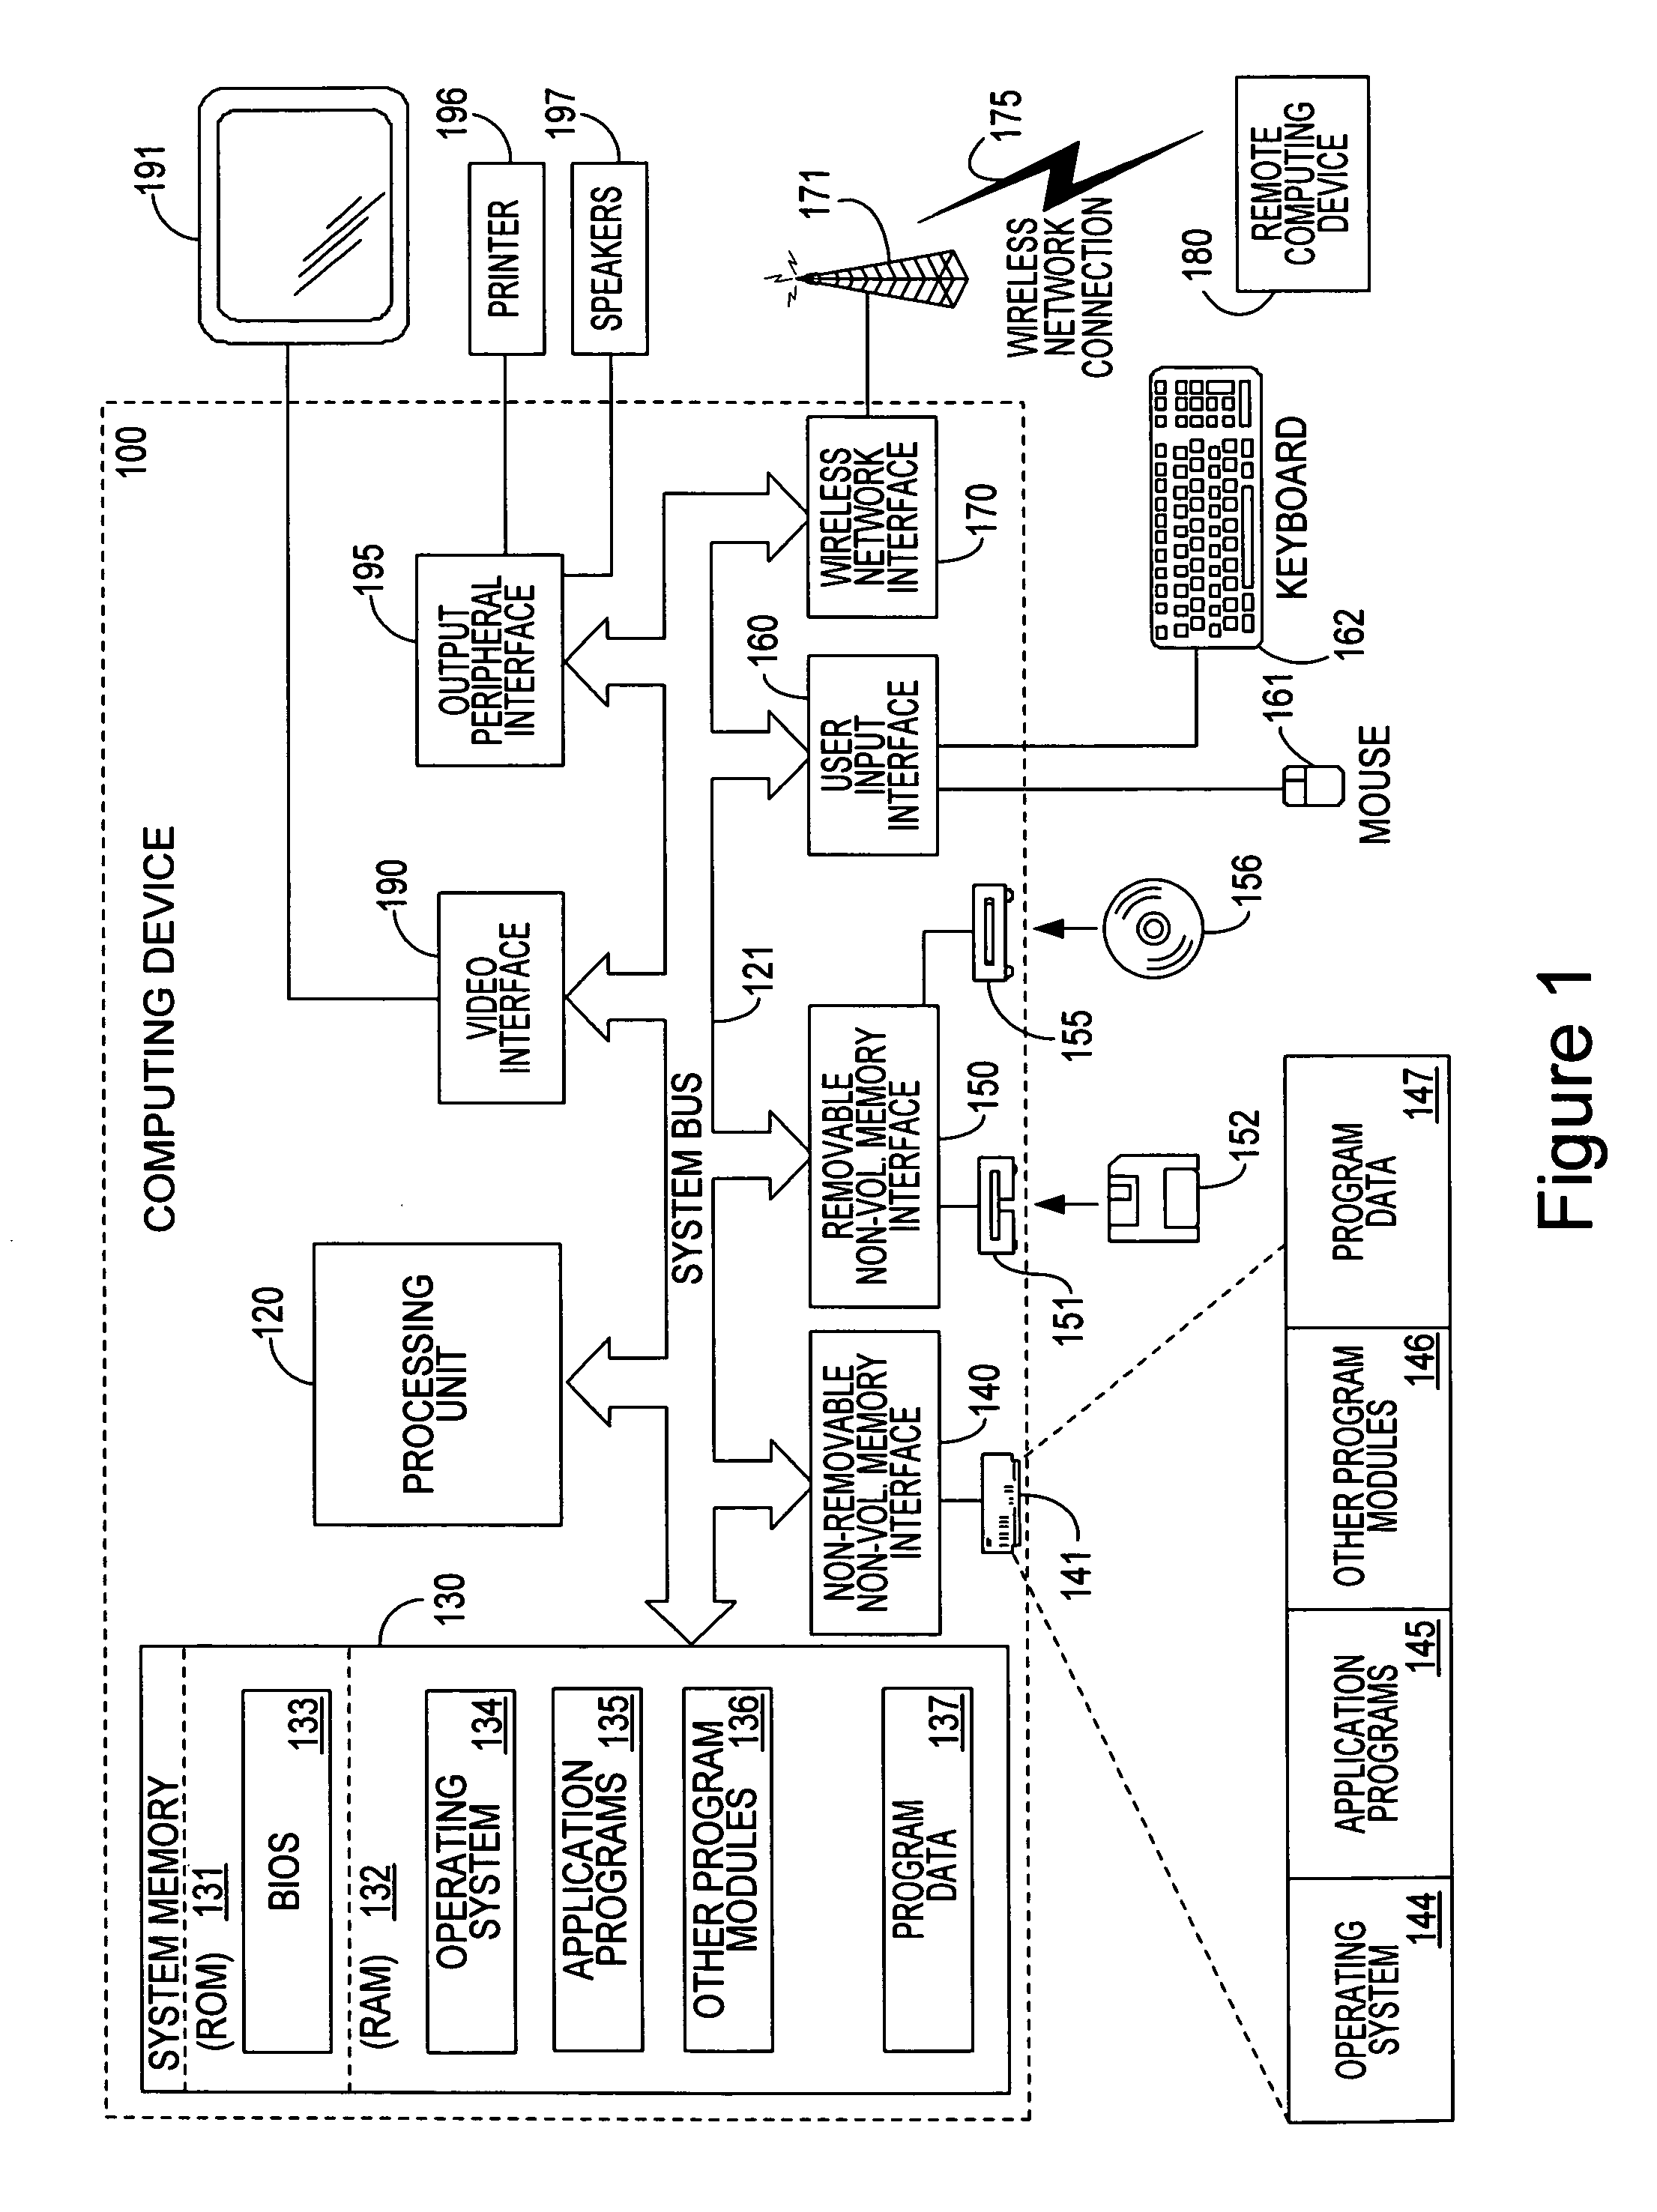 Method for maintaining wireless network response time while saving wireless adapter power